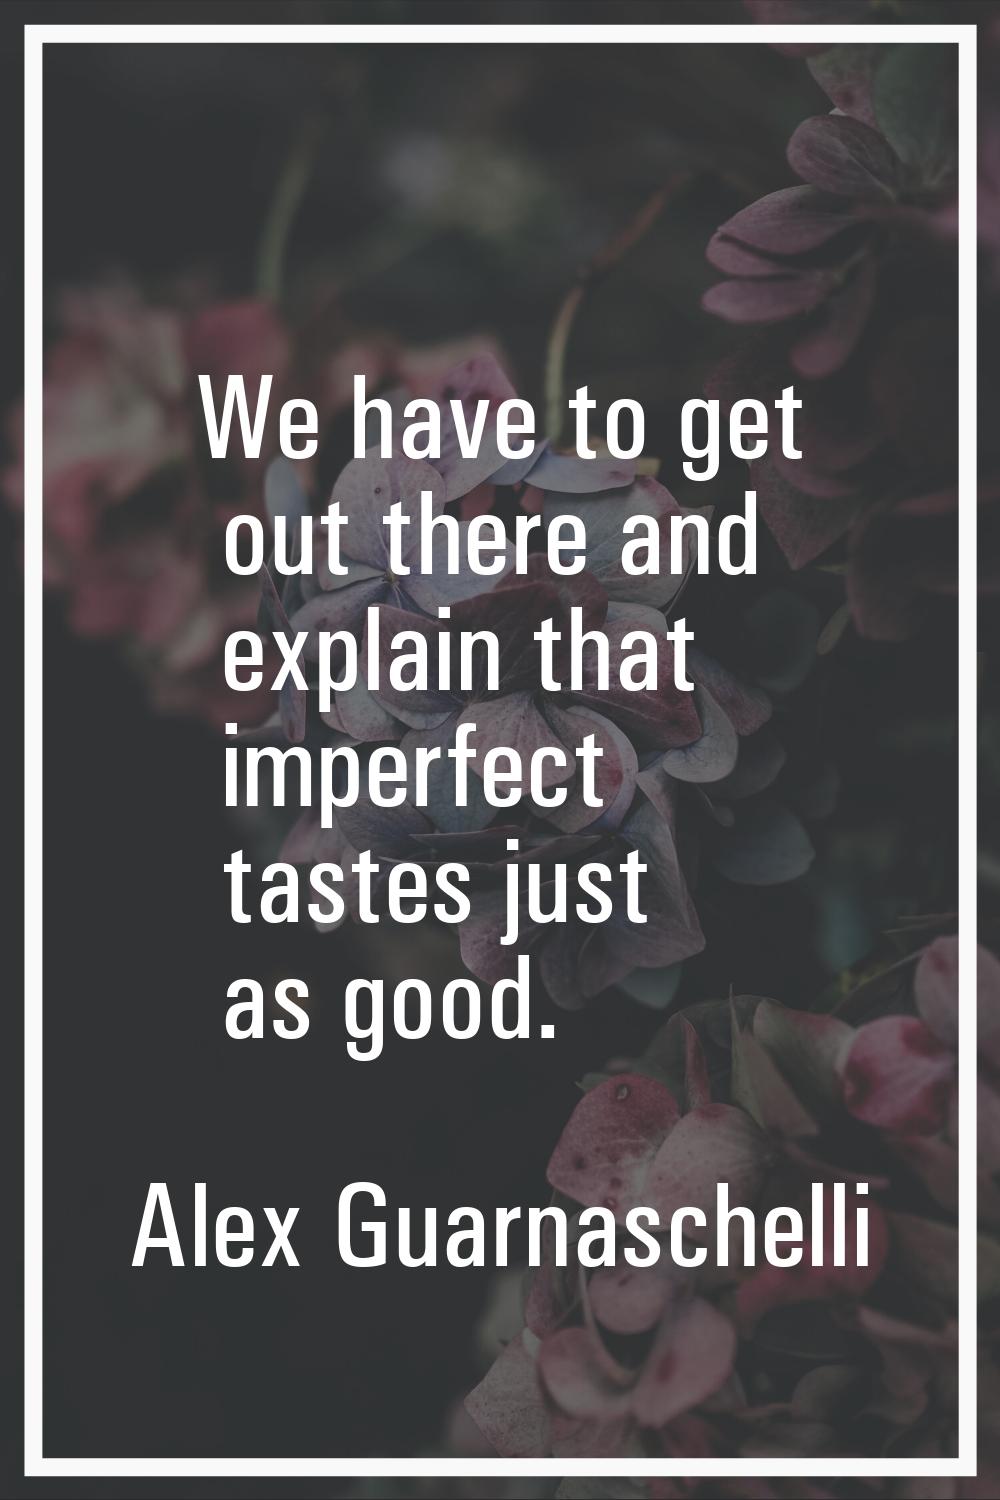 We have to get out there and explain that imperfect tastes just as good.